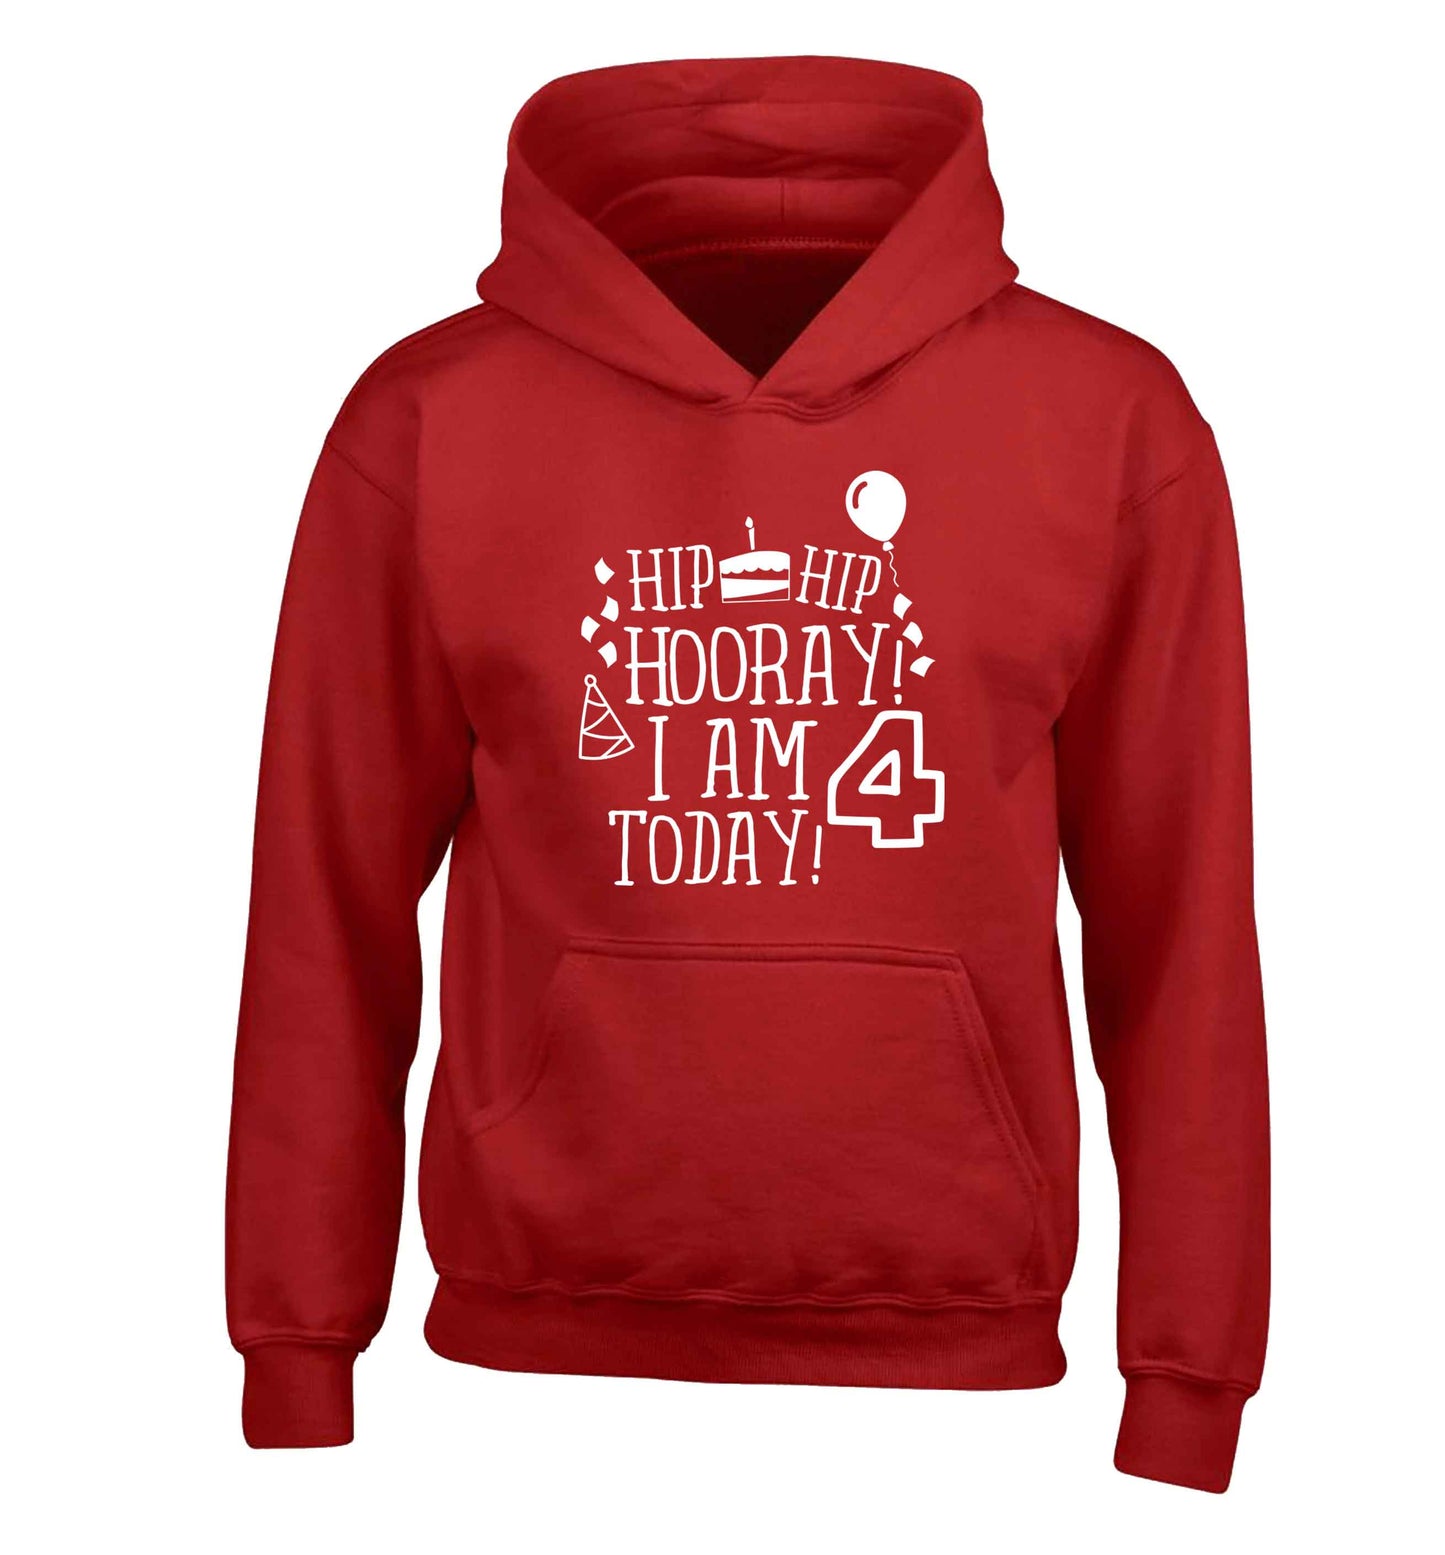 Hip hip hooray I am four today! children's red hoodie 12-13 Years